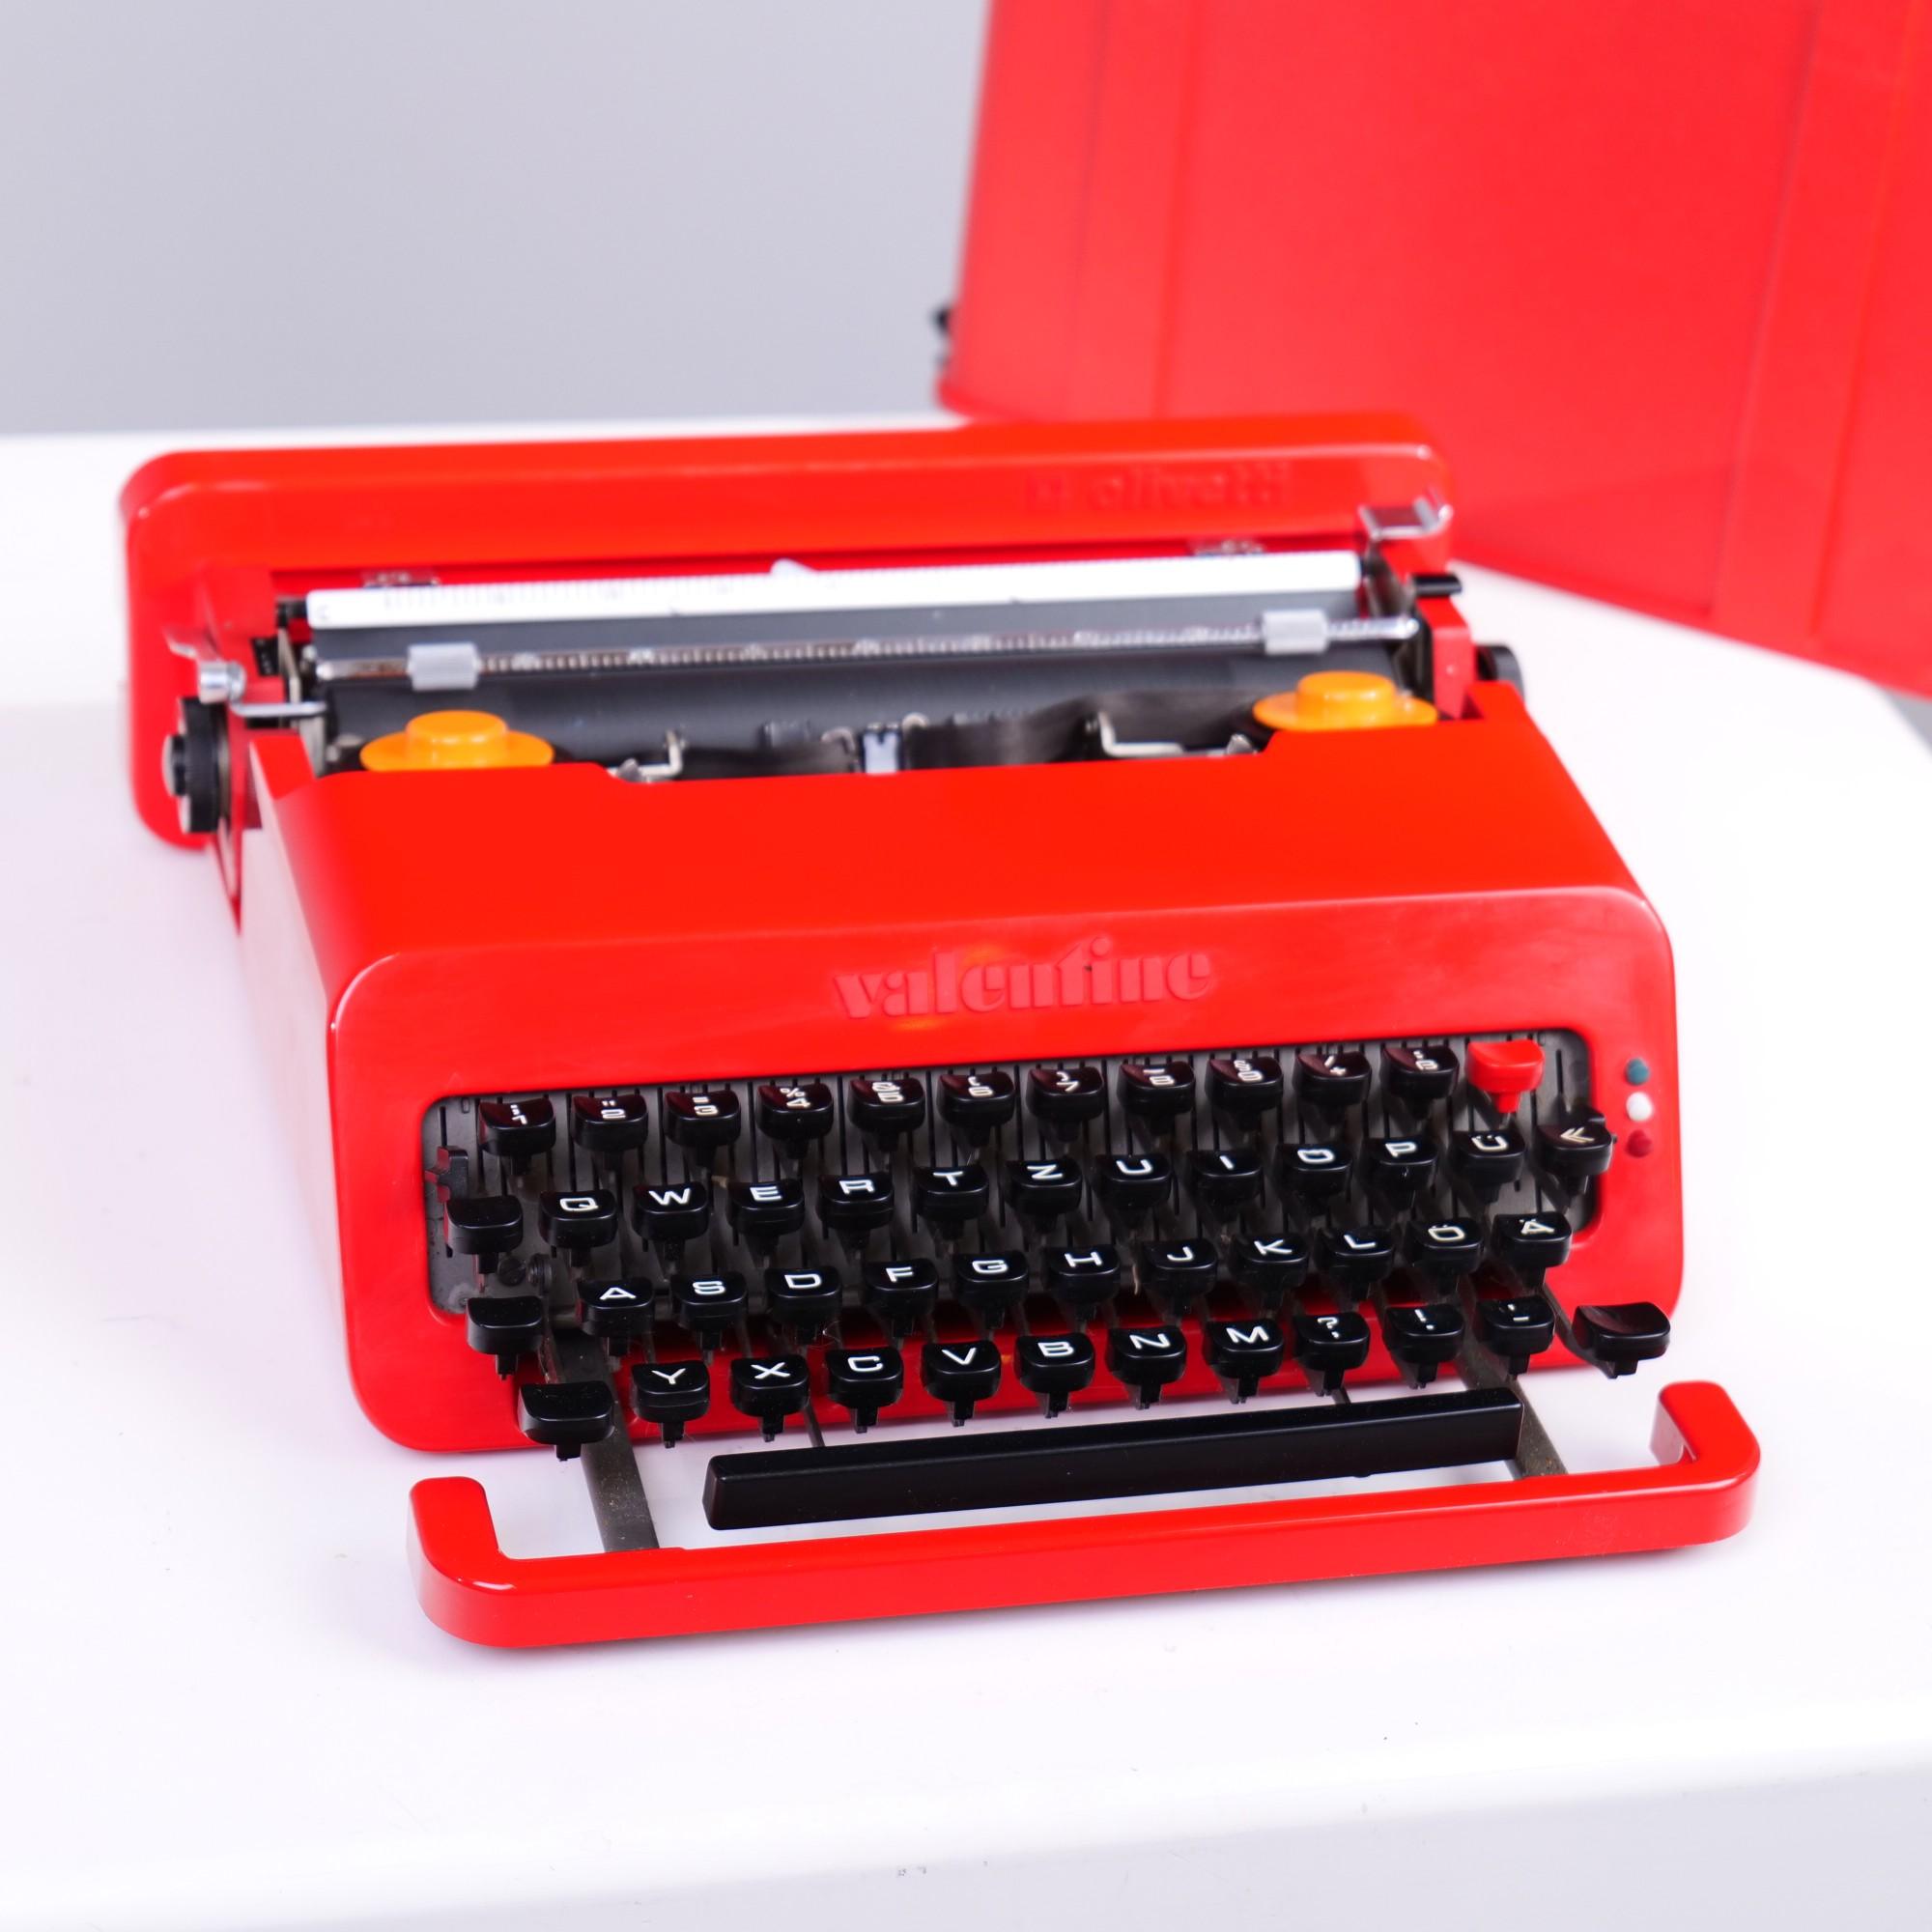 Red portable typewriter in working condition with original traveler box. The design is from 1969.

Made in Italy - 60s/70s 

dimensions:
11.5 cm heigh
34.5 depth
35 cm width

slight signs of use - working condition.